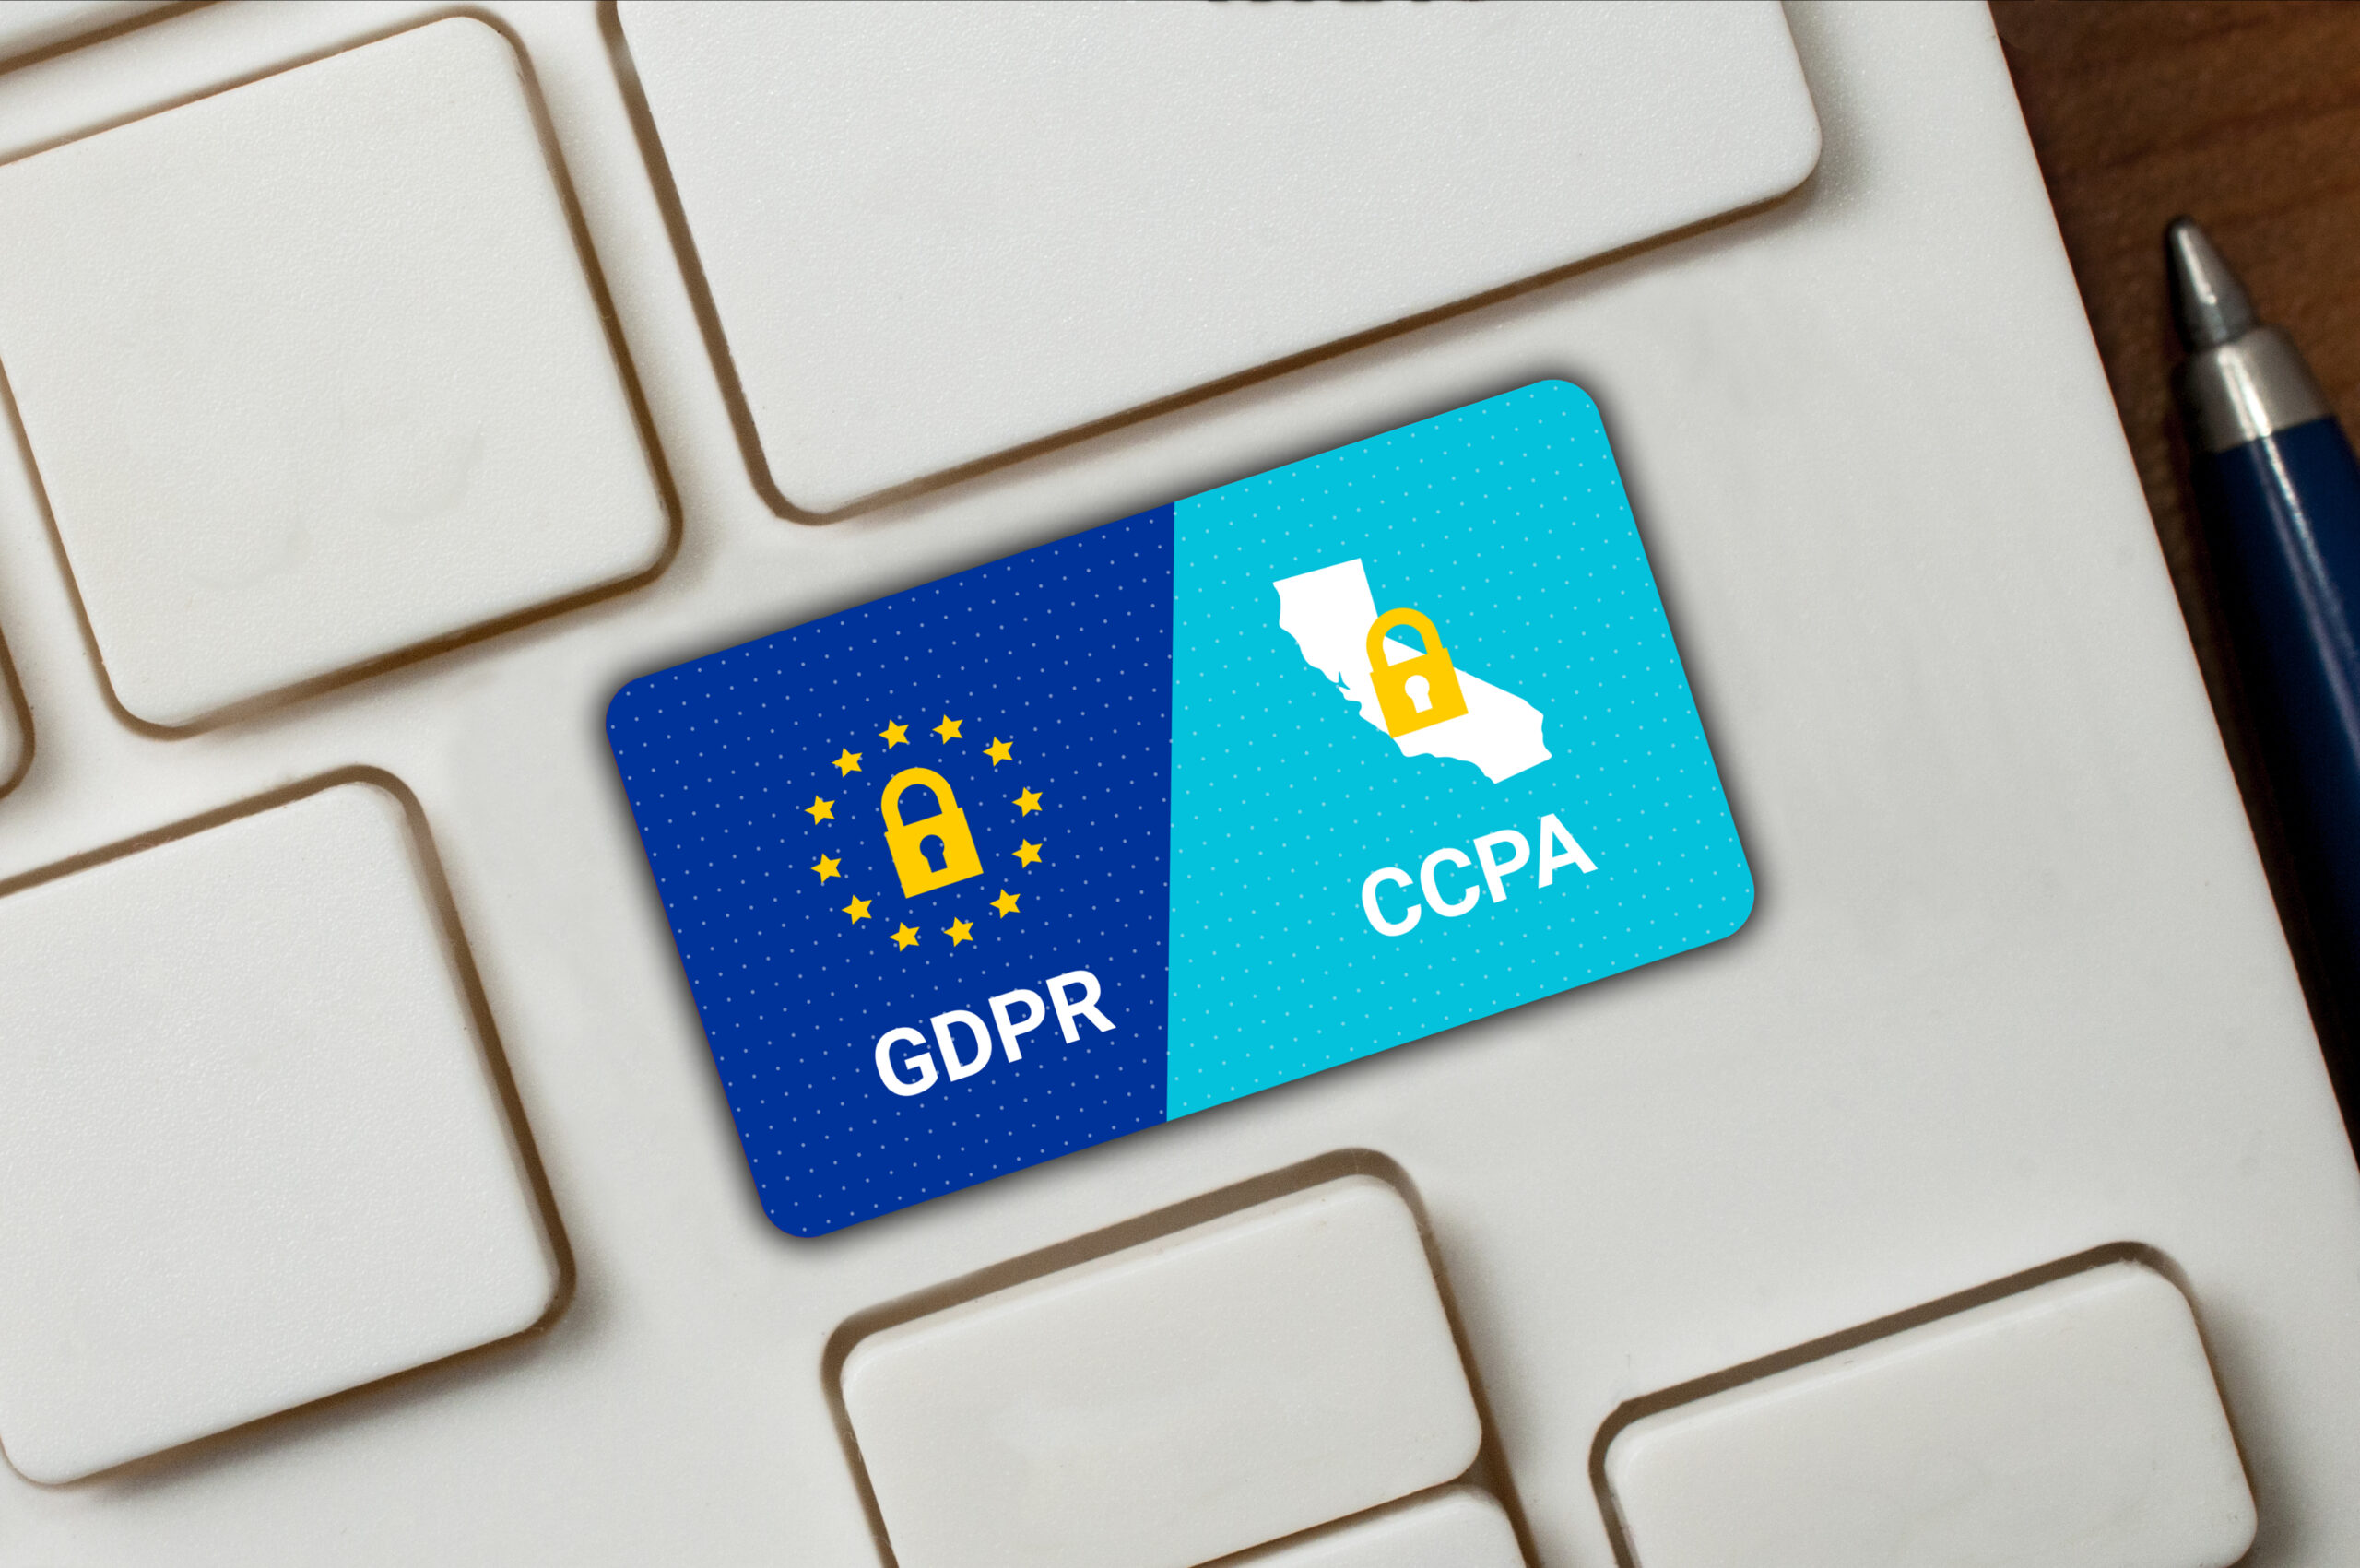 Comparing Effects of and Responses to the GDPR and CCPA/CPRA